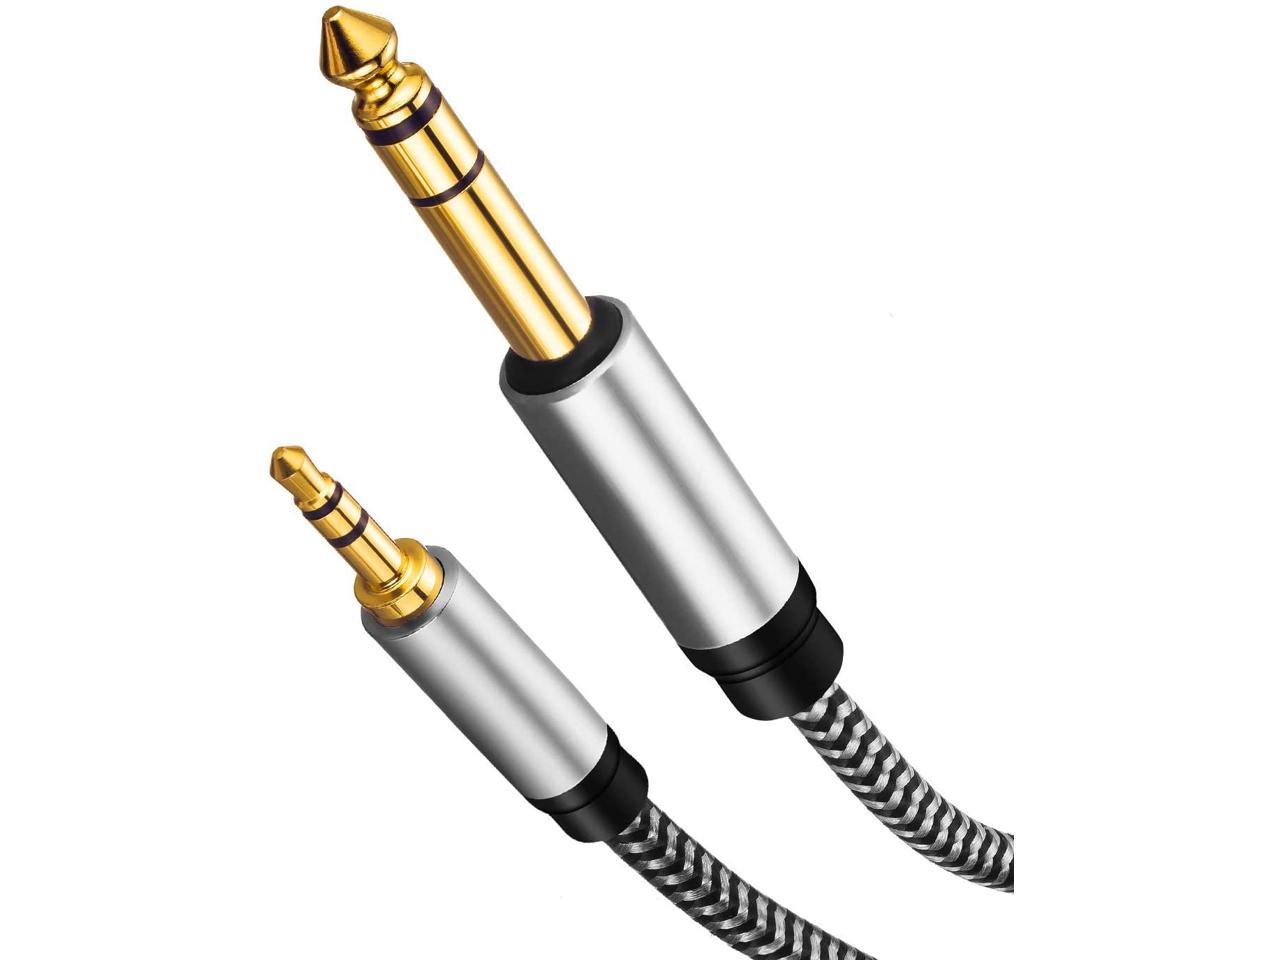 Home Theater Devices Morelecs 1/4 to 3.5mm Headphones Cable 6.6ft 6.35mm 1/4 Male to 3.5mm 1/8 Female TRS Stereo Audio Cable Nylon Braid Compatible for Amplifiers Guitar Piano 